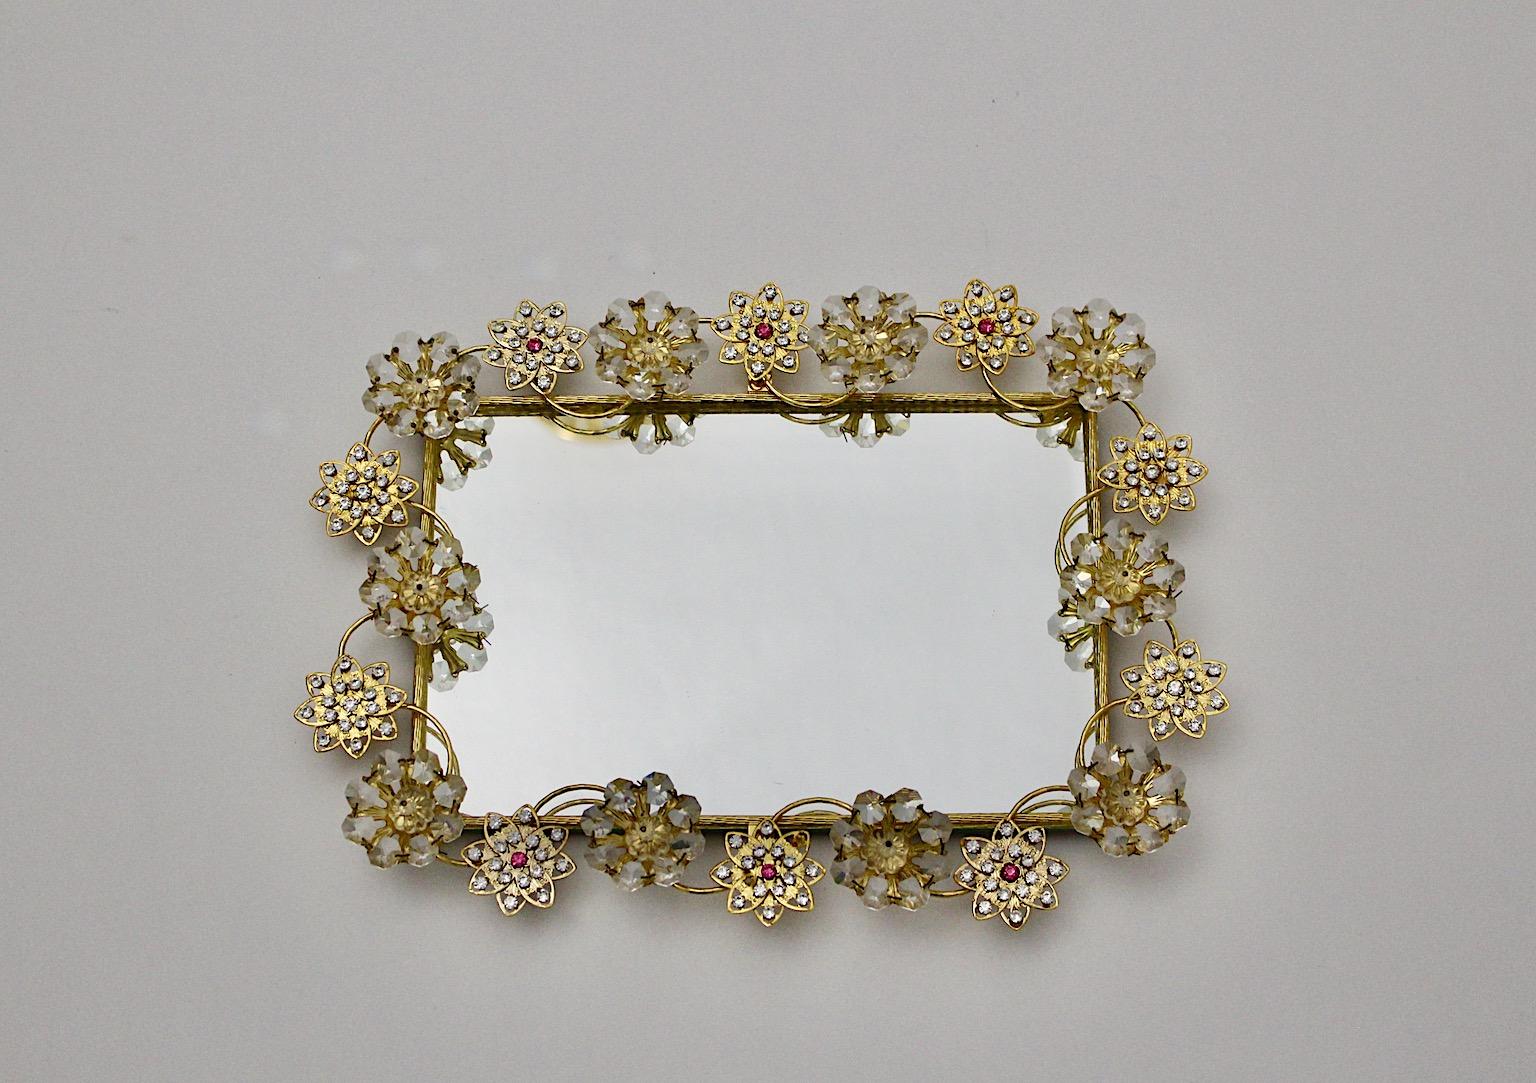 Modern Vintage Rectangular Glass Golden Metal Wall Mirror, 1990s, Italy For Sale 2